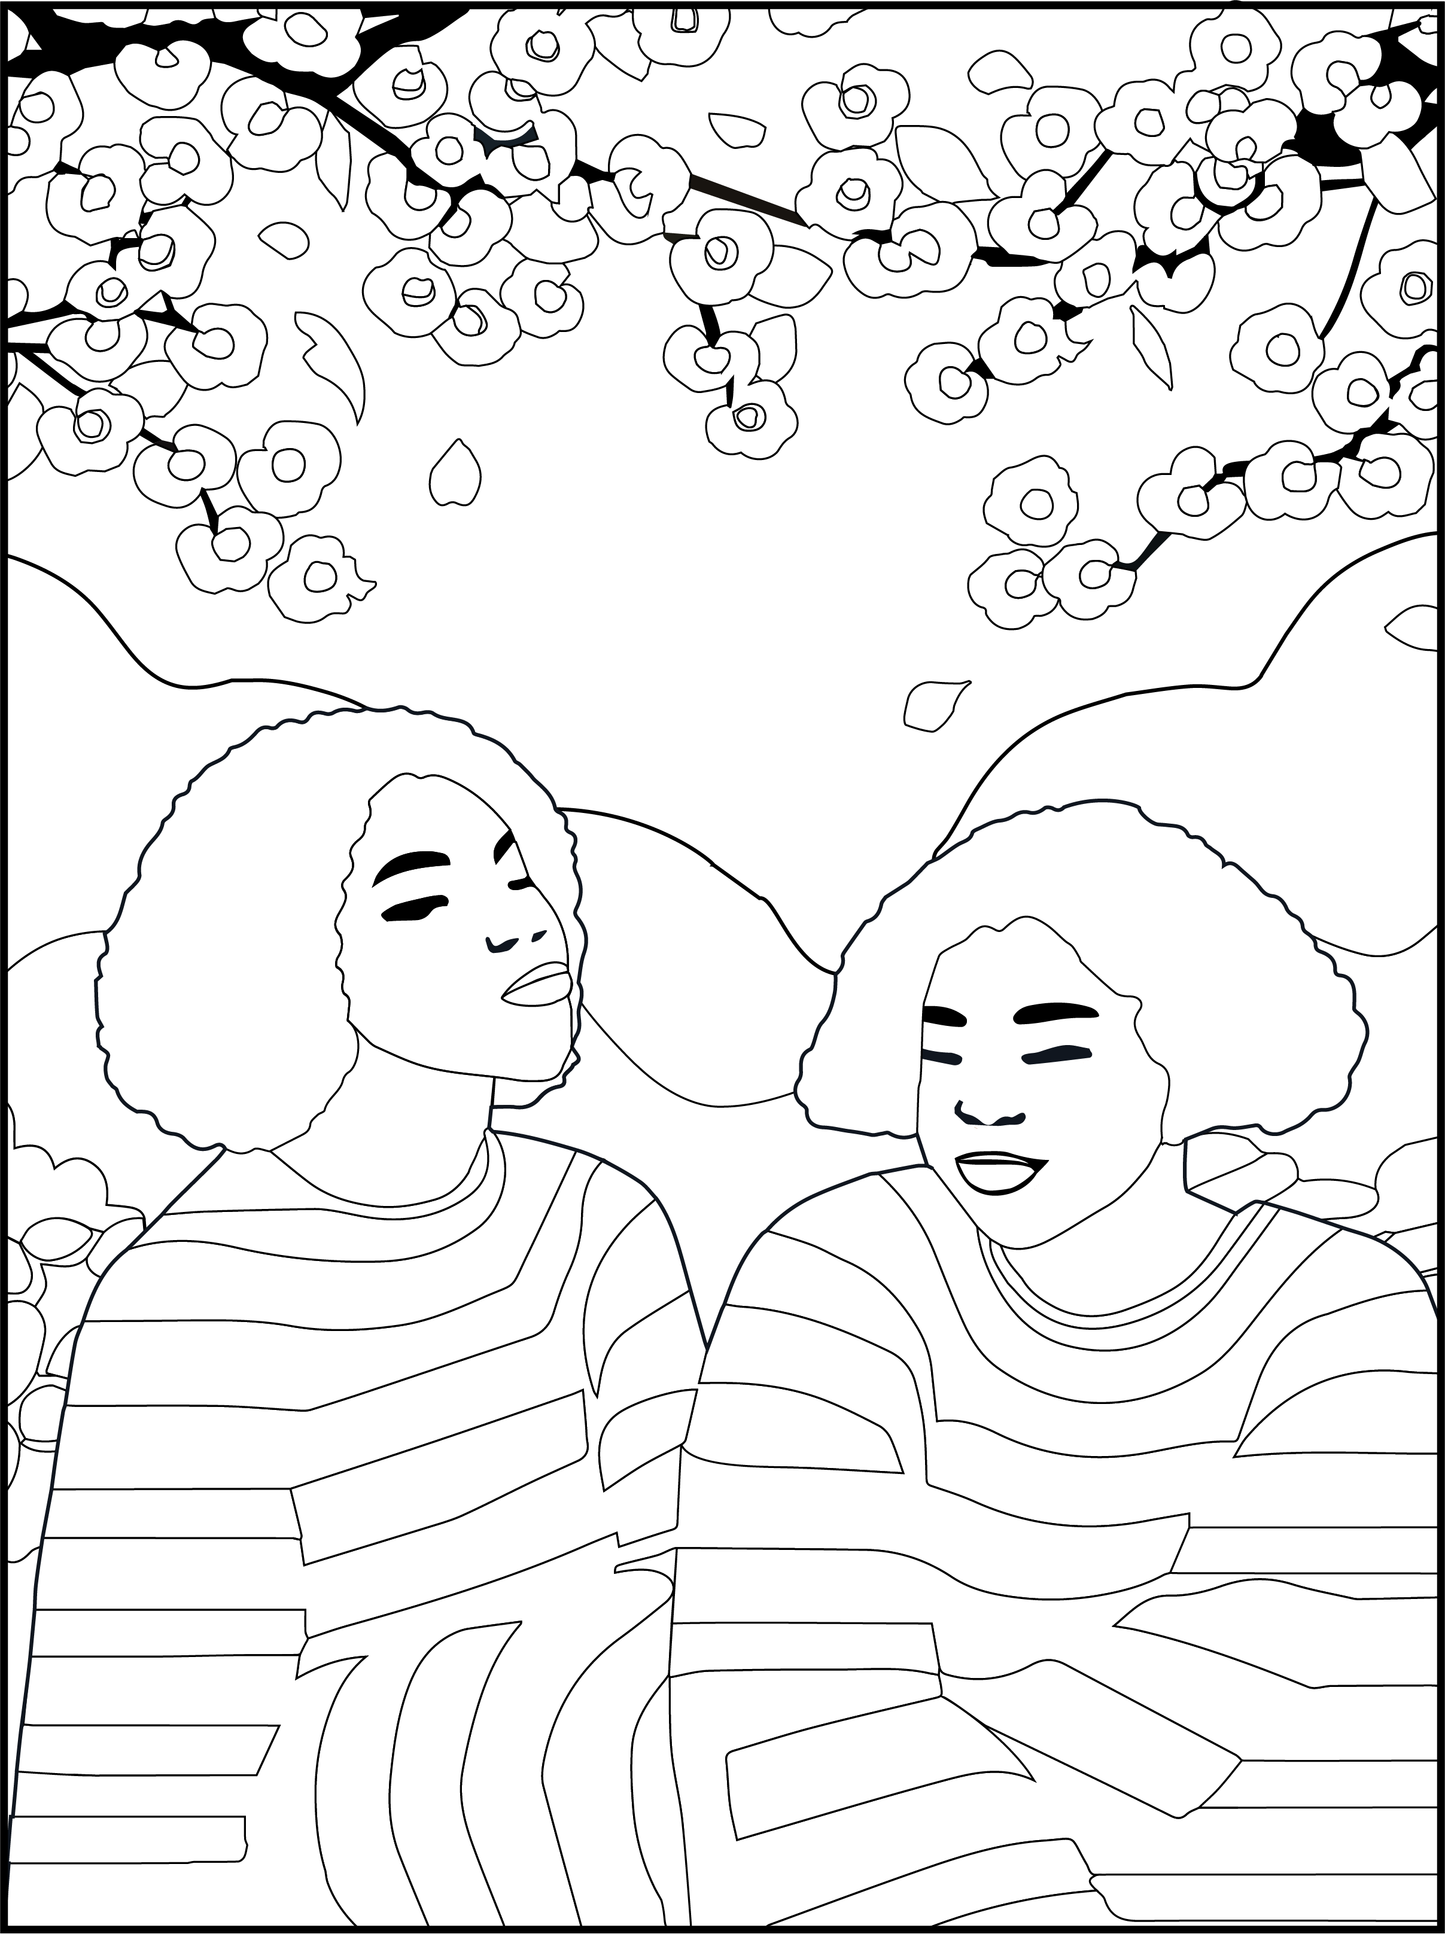 Cherry Blossom Season: April Coloring Page - Digital Download